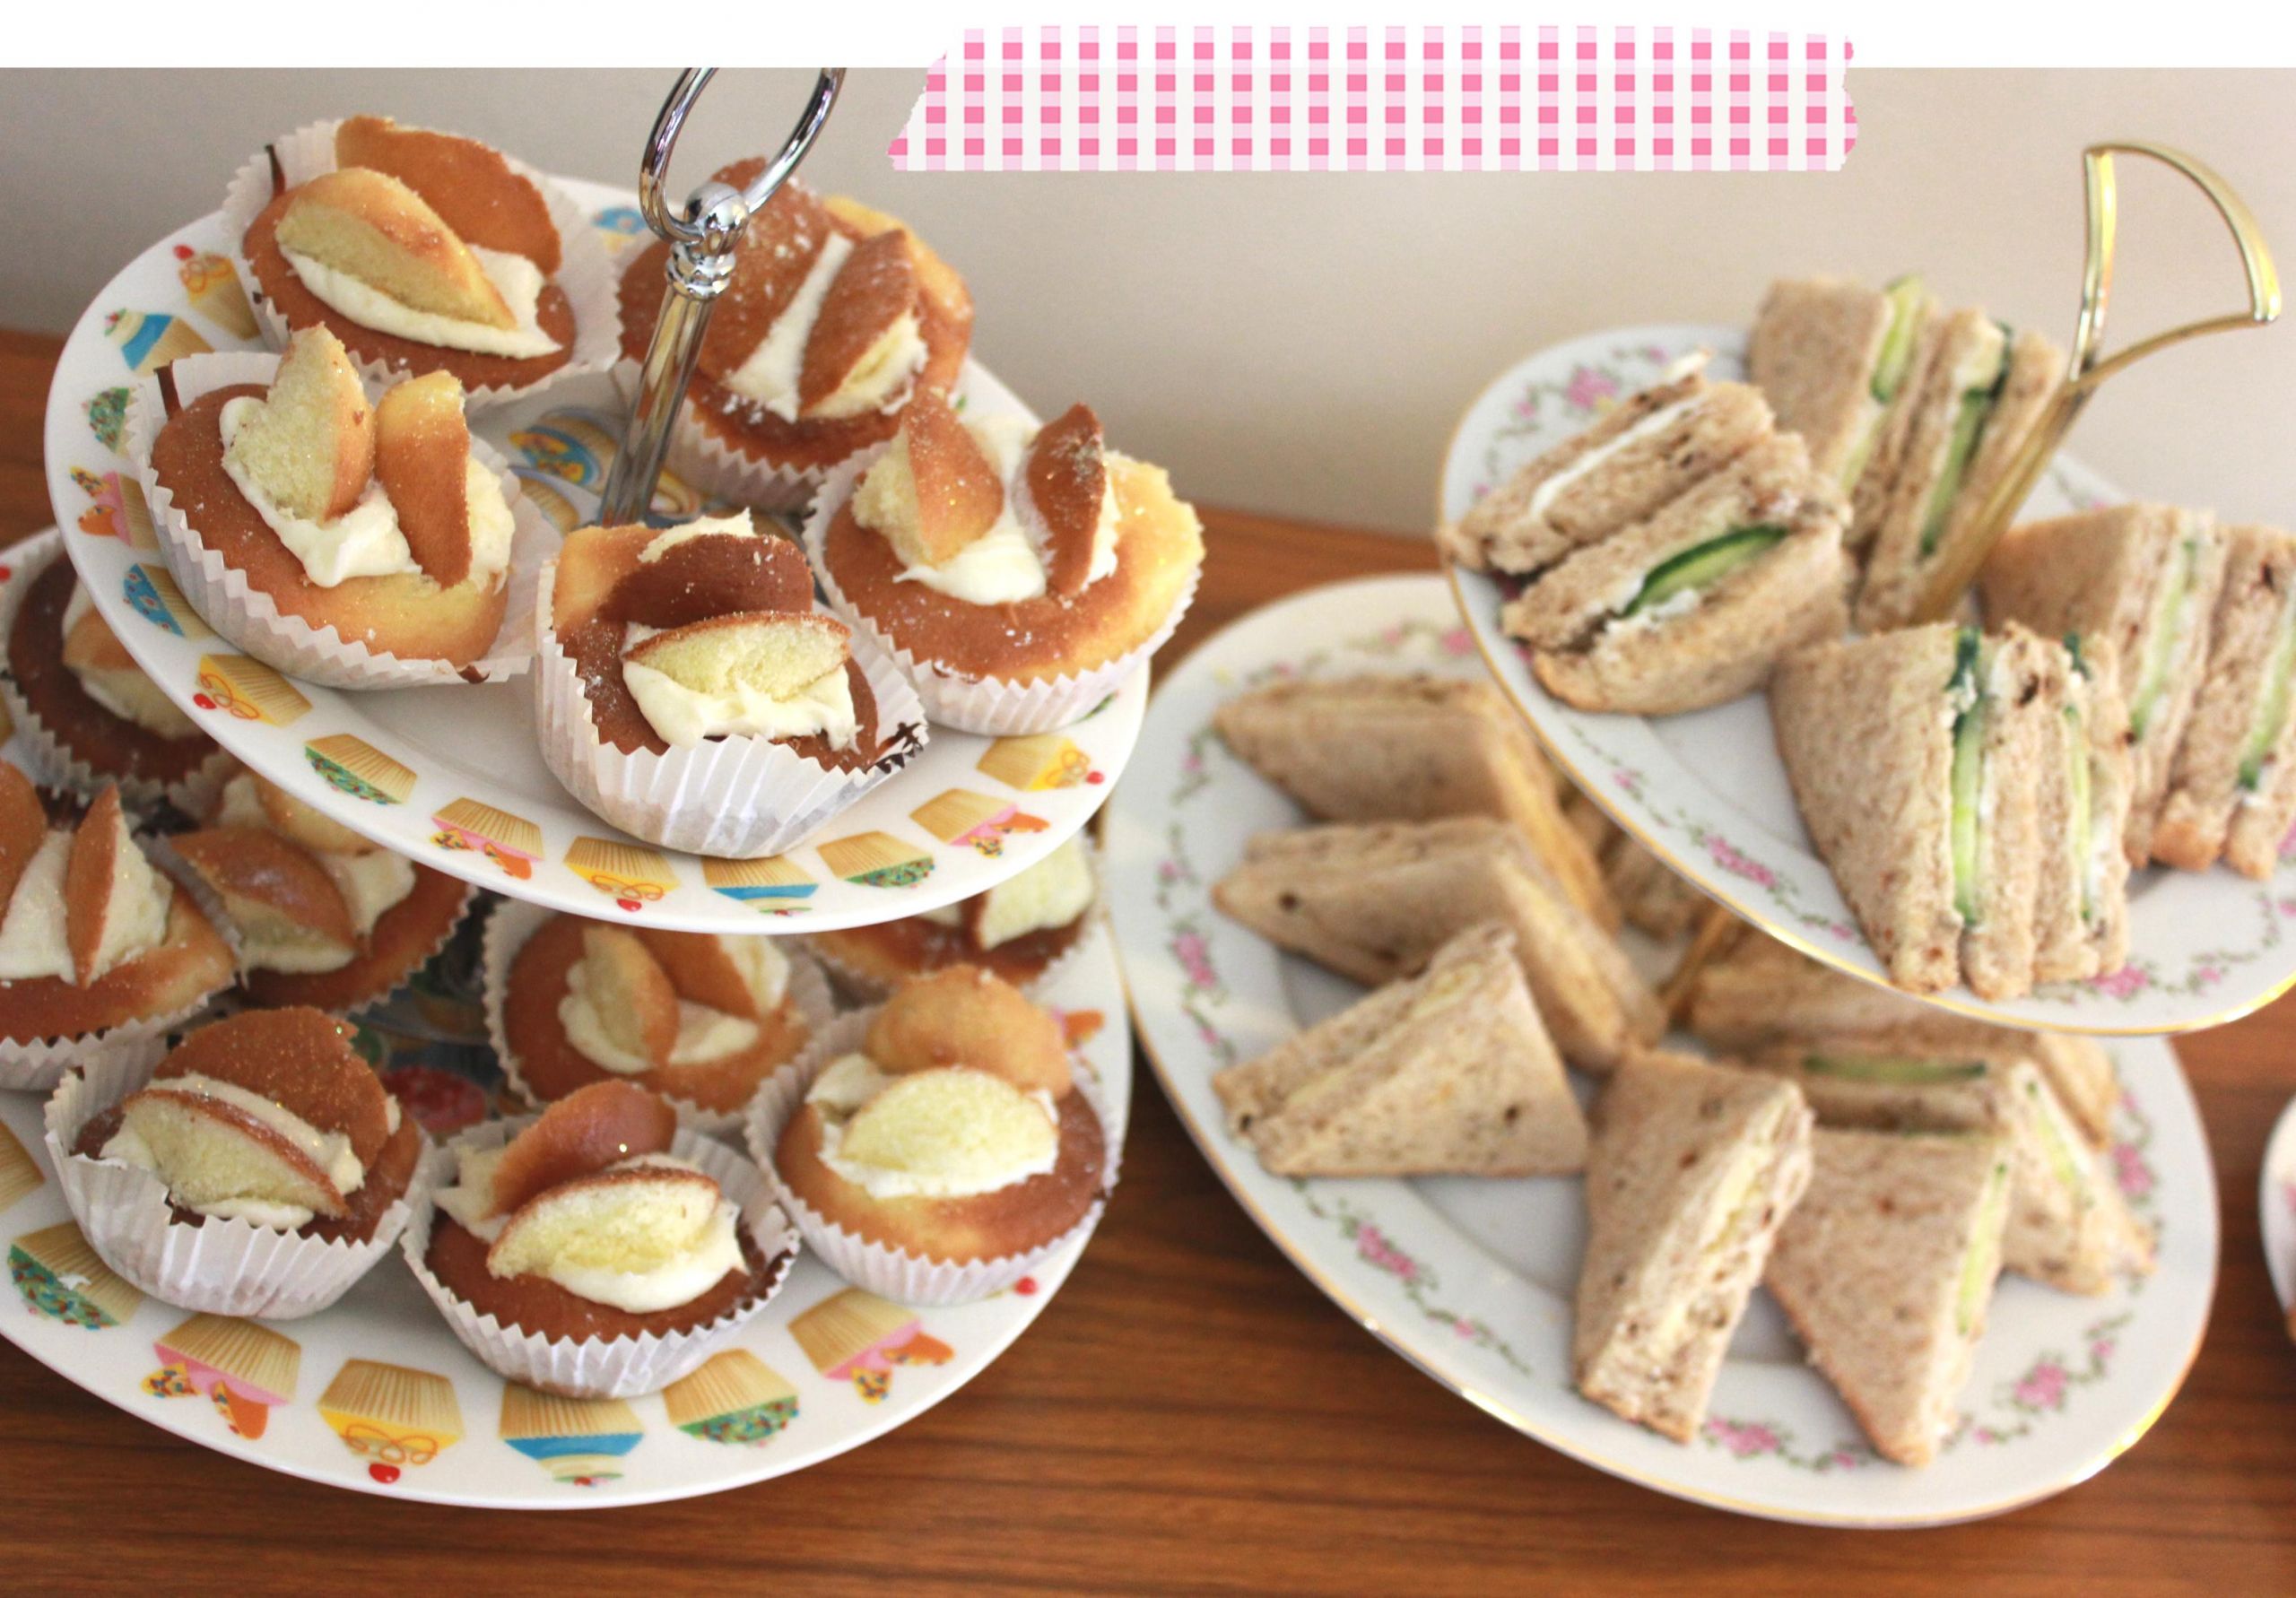 Tea Party At Home Ideas
 Anyone for afternoon tea Ideas for a thrifty party